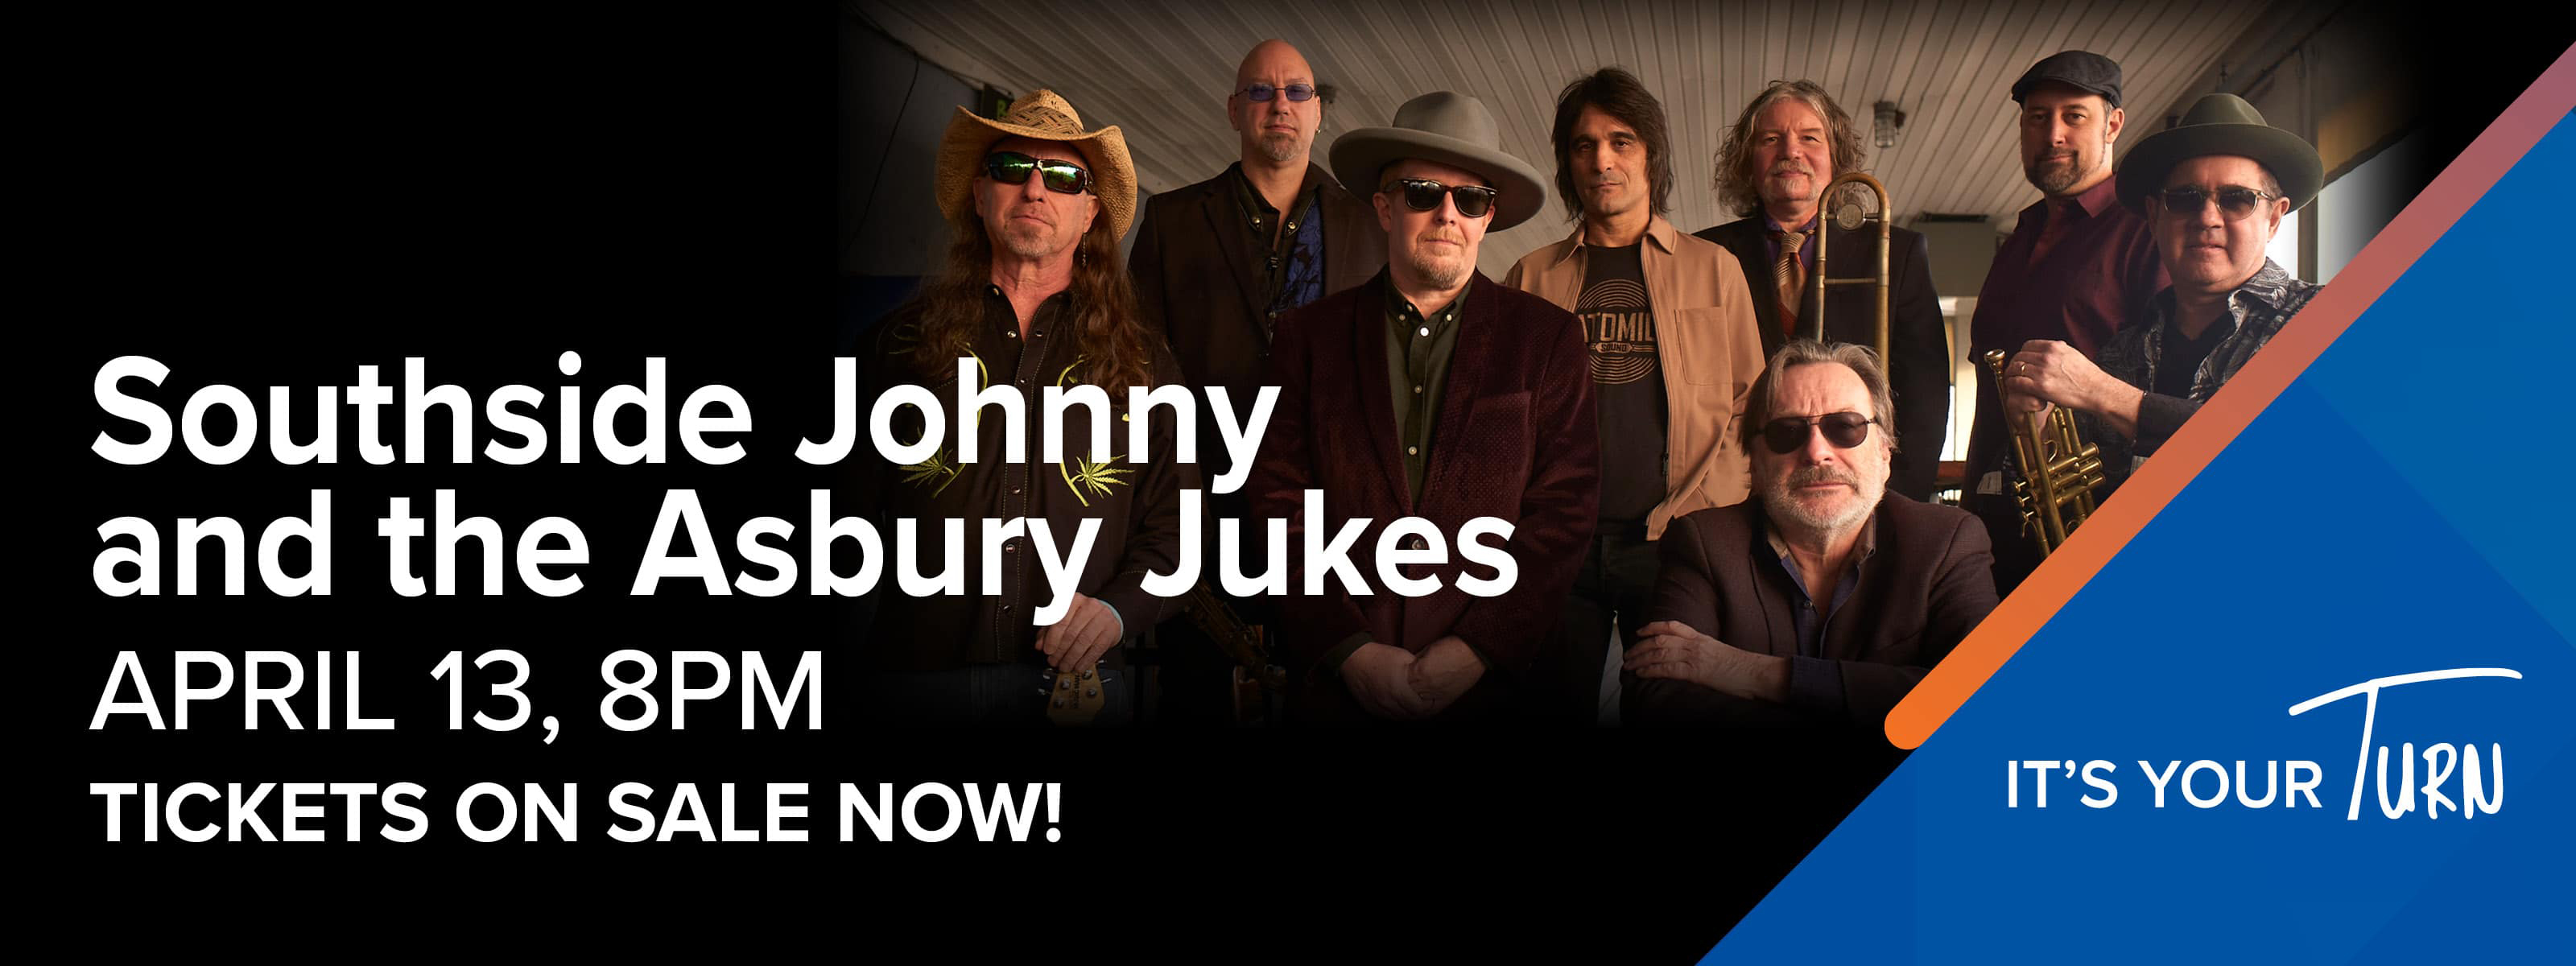 Southside Johnny and the Asbury Jukes April 13 8PM Tickets On Sale Now